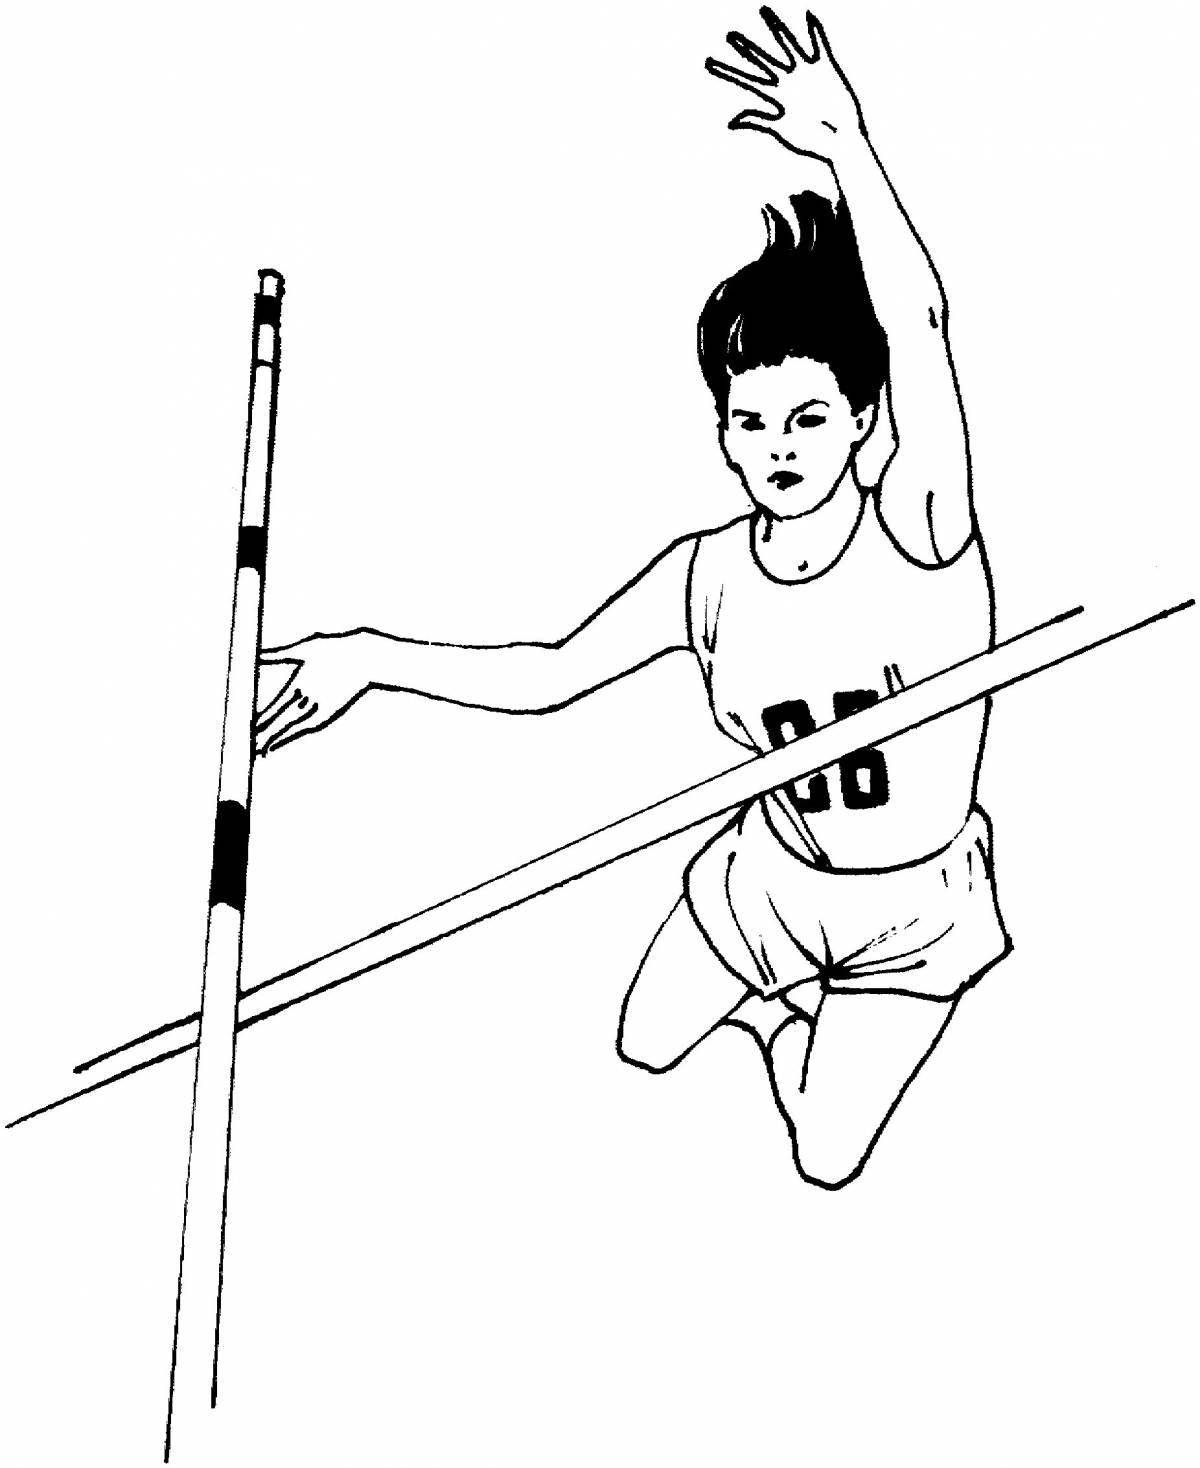 Outstanding Athletics coloring page